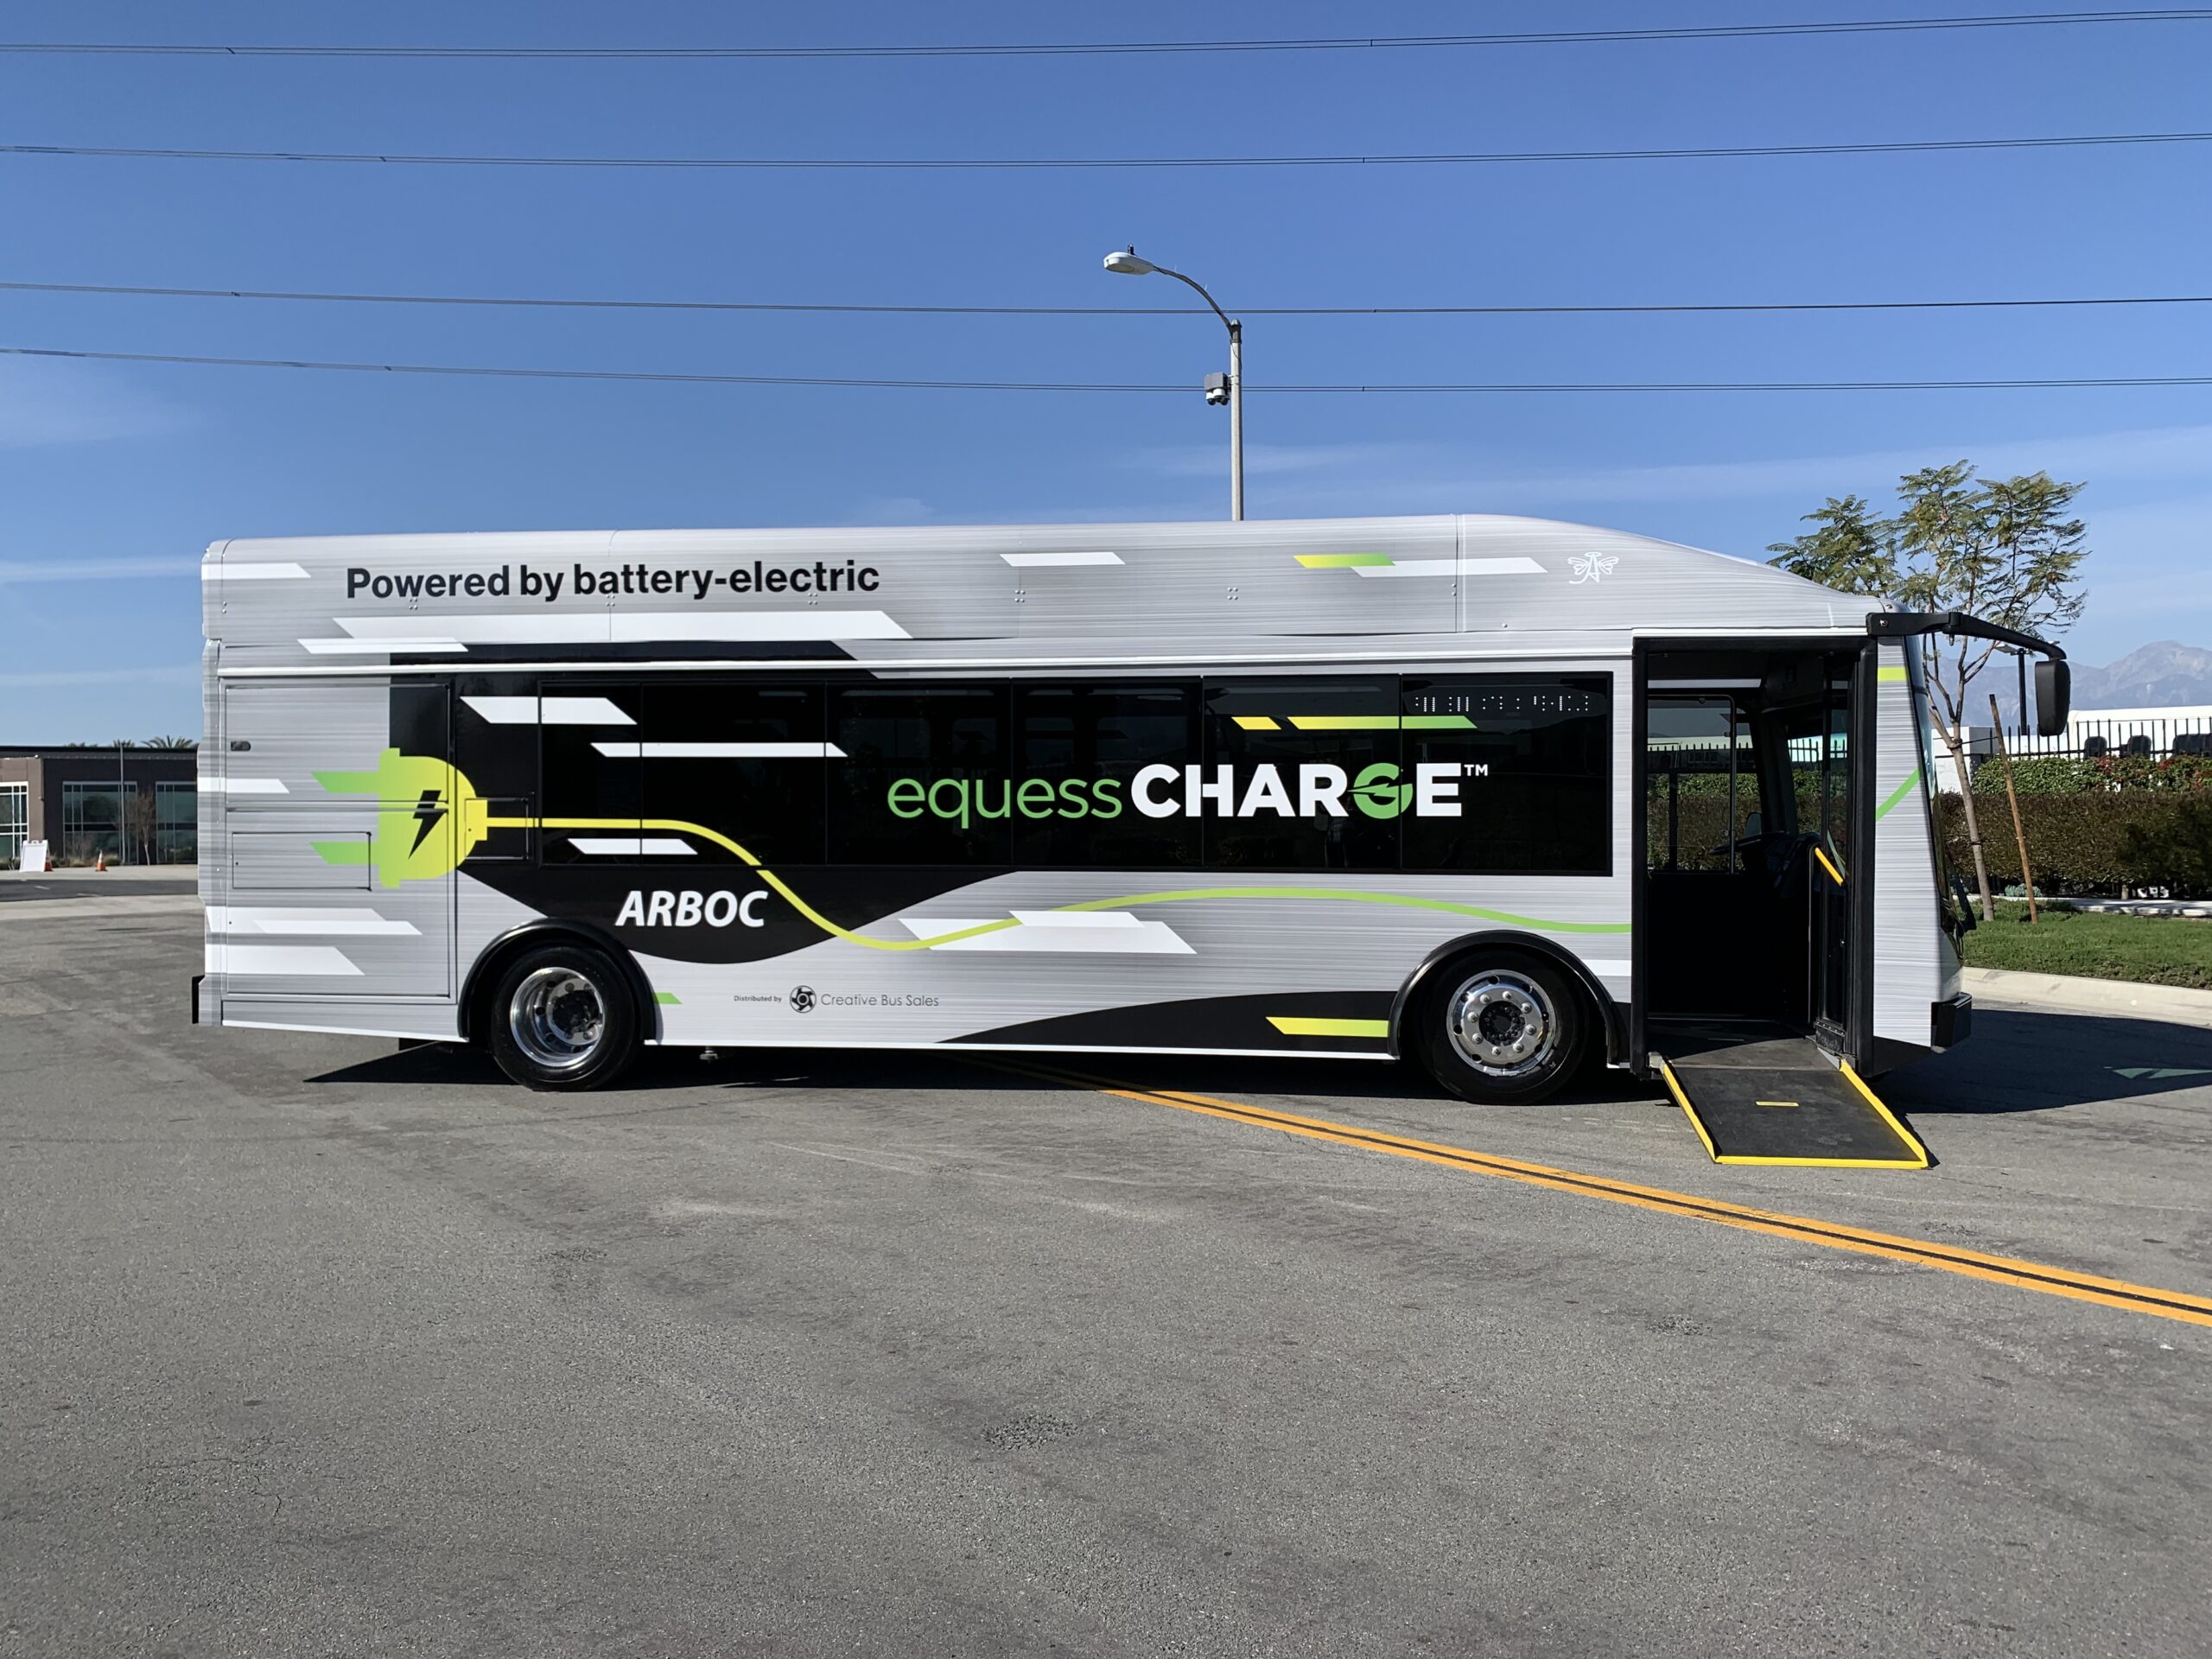 A 2021 black and white electric bus parked in a parking lot.